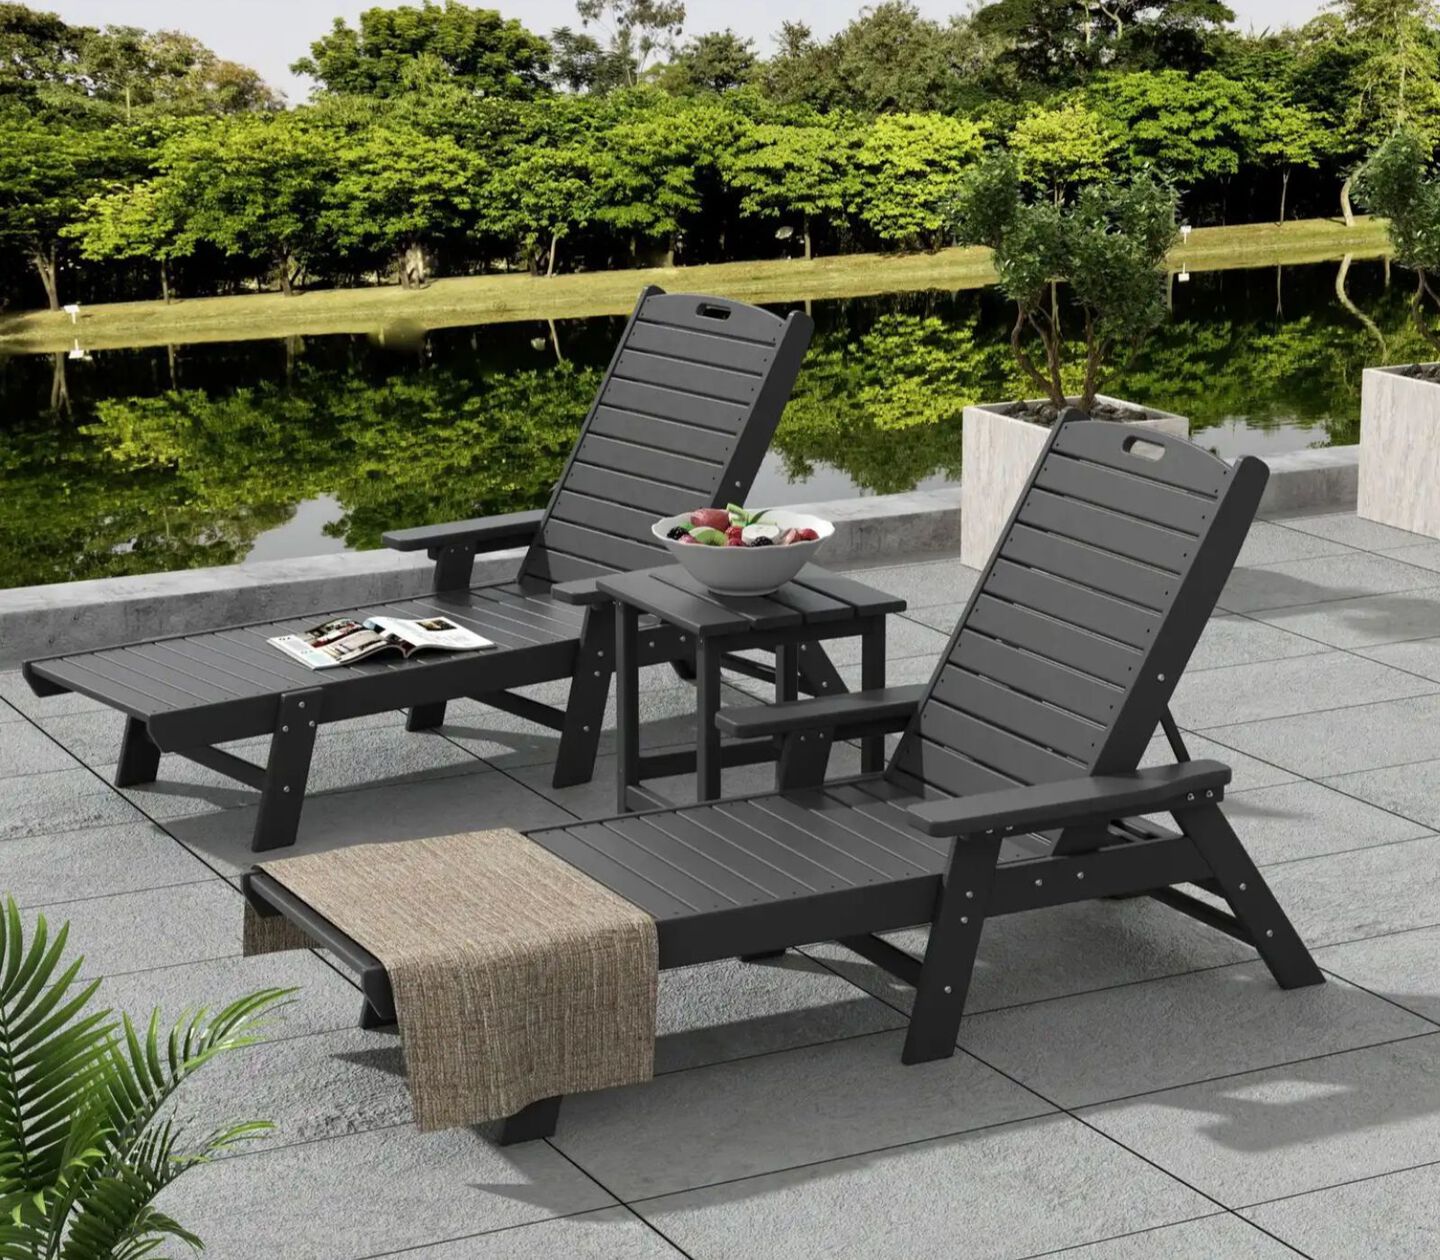 Two dark grey patio lounge chairs with matching table between them